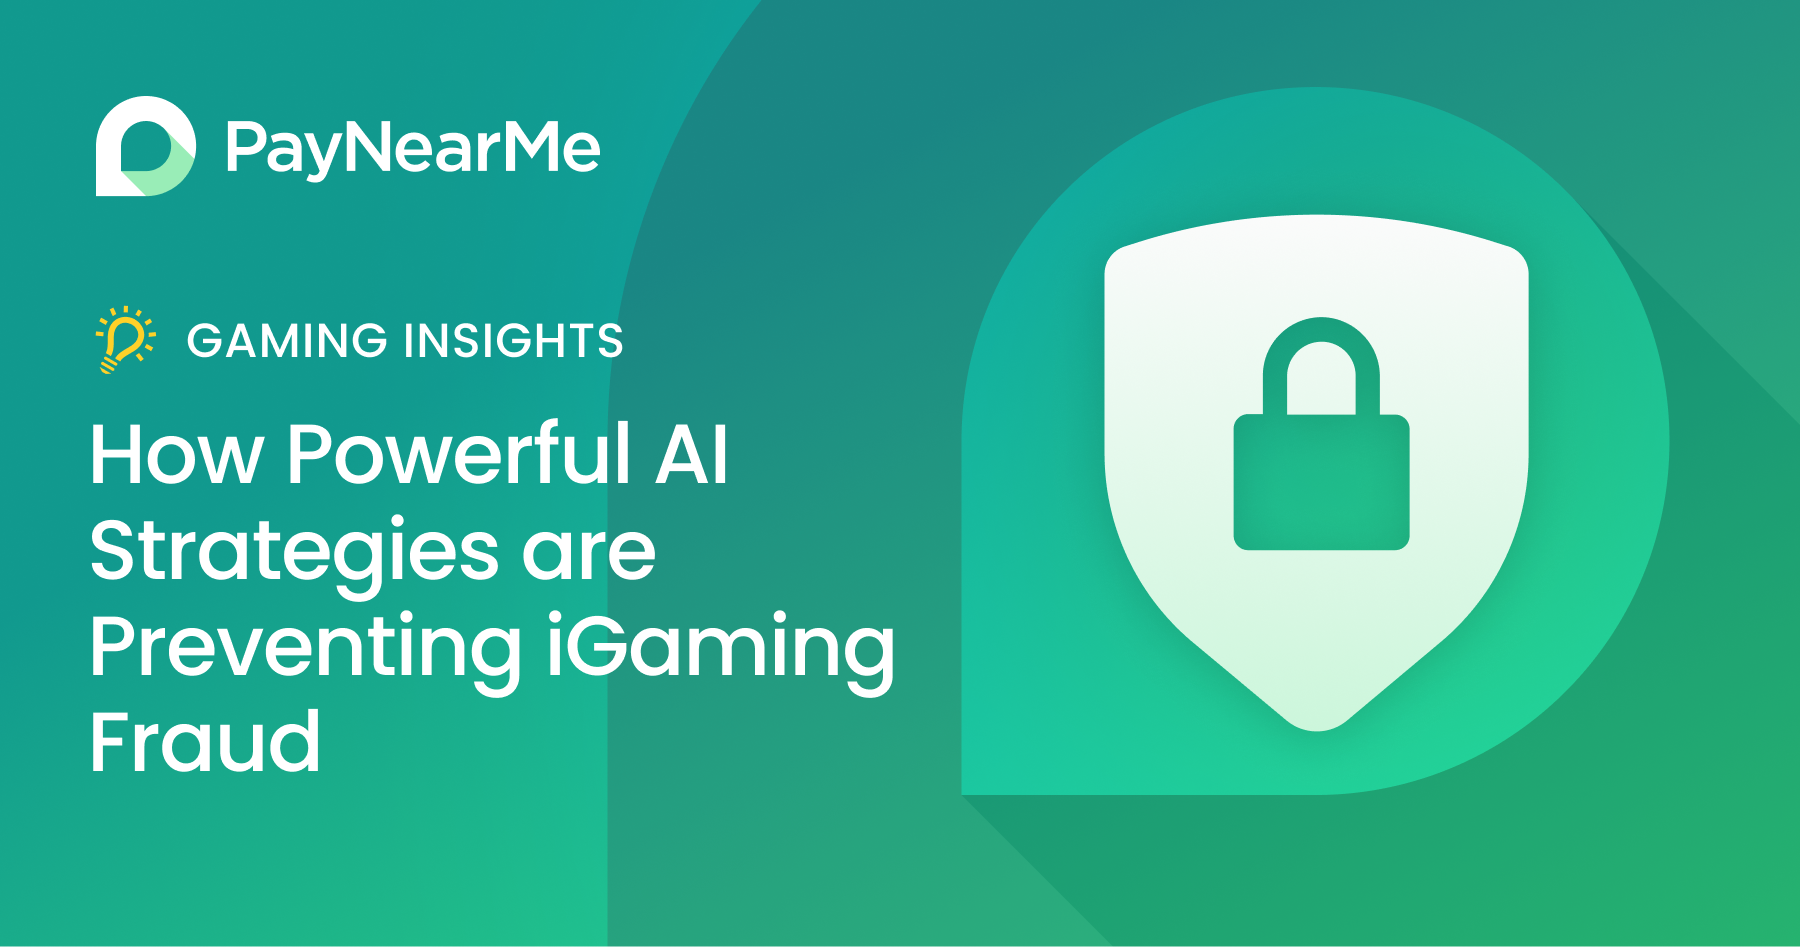 How Powerful AI Strategies are Preventing iGaming Fraud